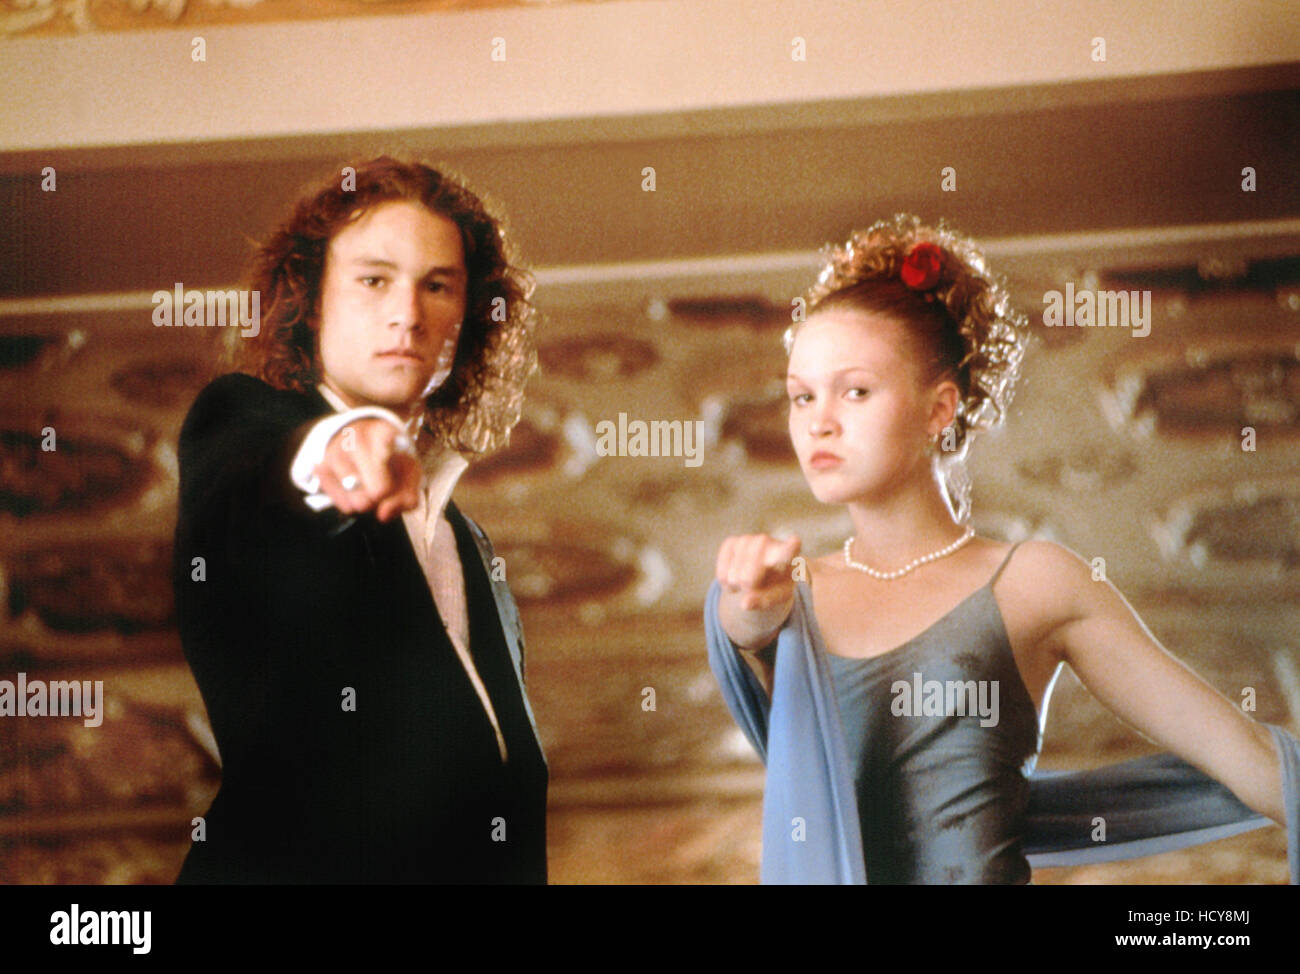 10 THINGS I HATE ABOUT YOU, (aka TEN THINGS I HATE ABOUT YOU), Heath Ledger, Julia Stiles, 1999 Stock Photo